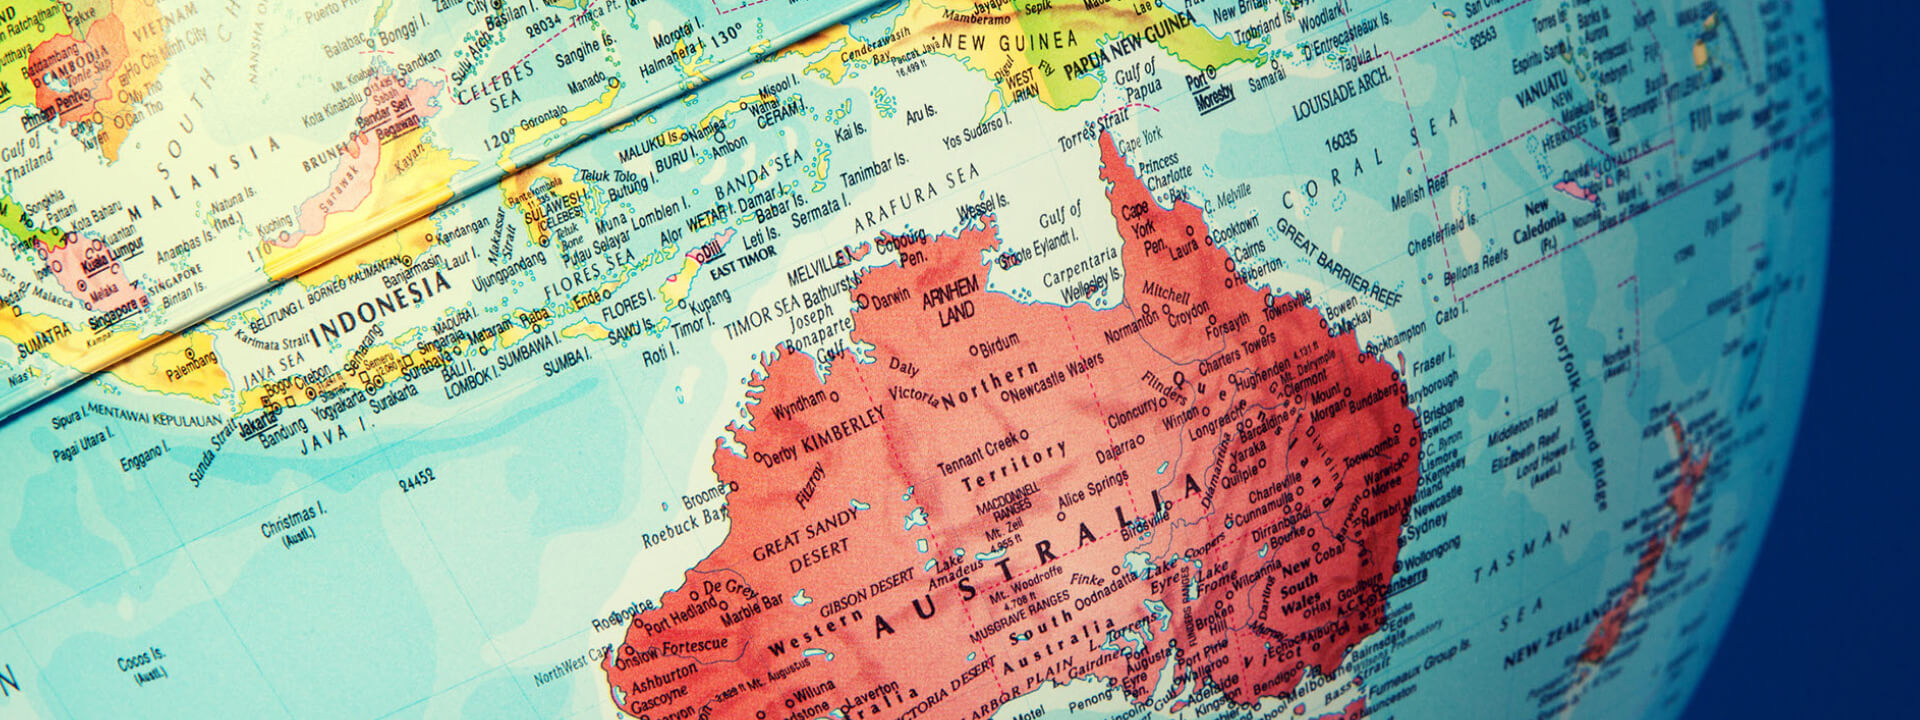 Australia will be left stranded as a lonely Western outpost in Asia by Prof. Kishore Mahbubani